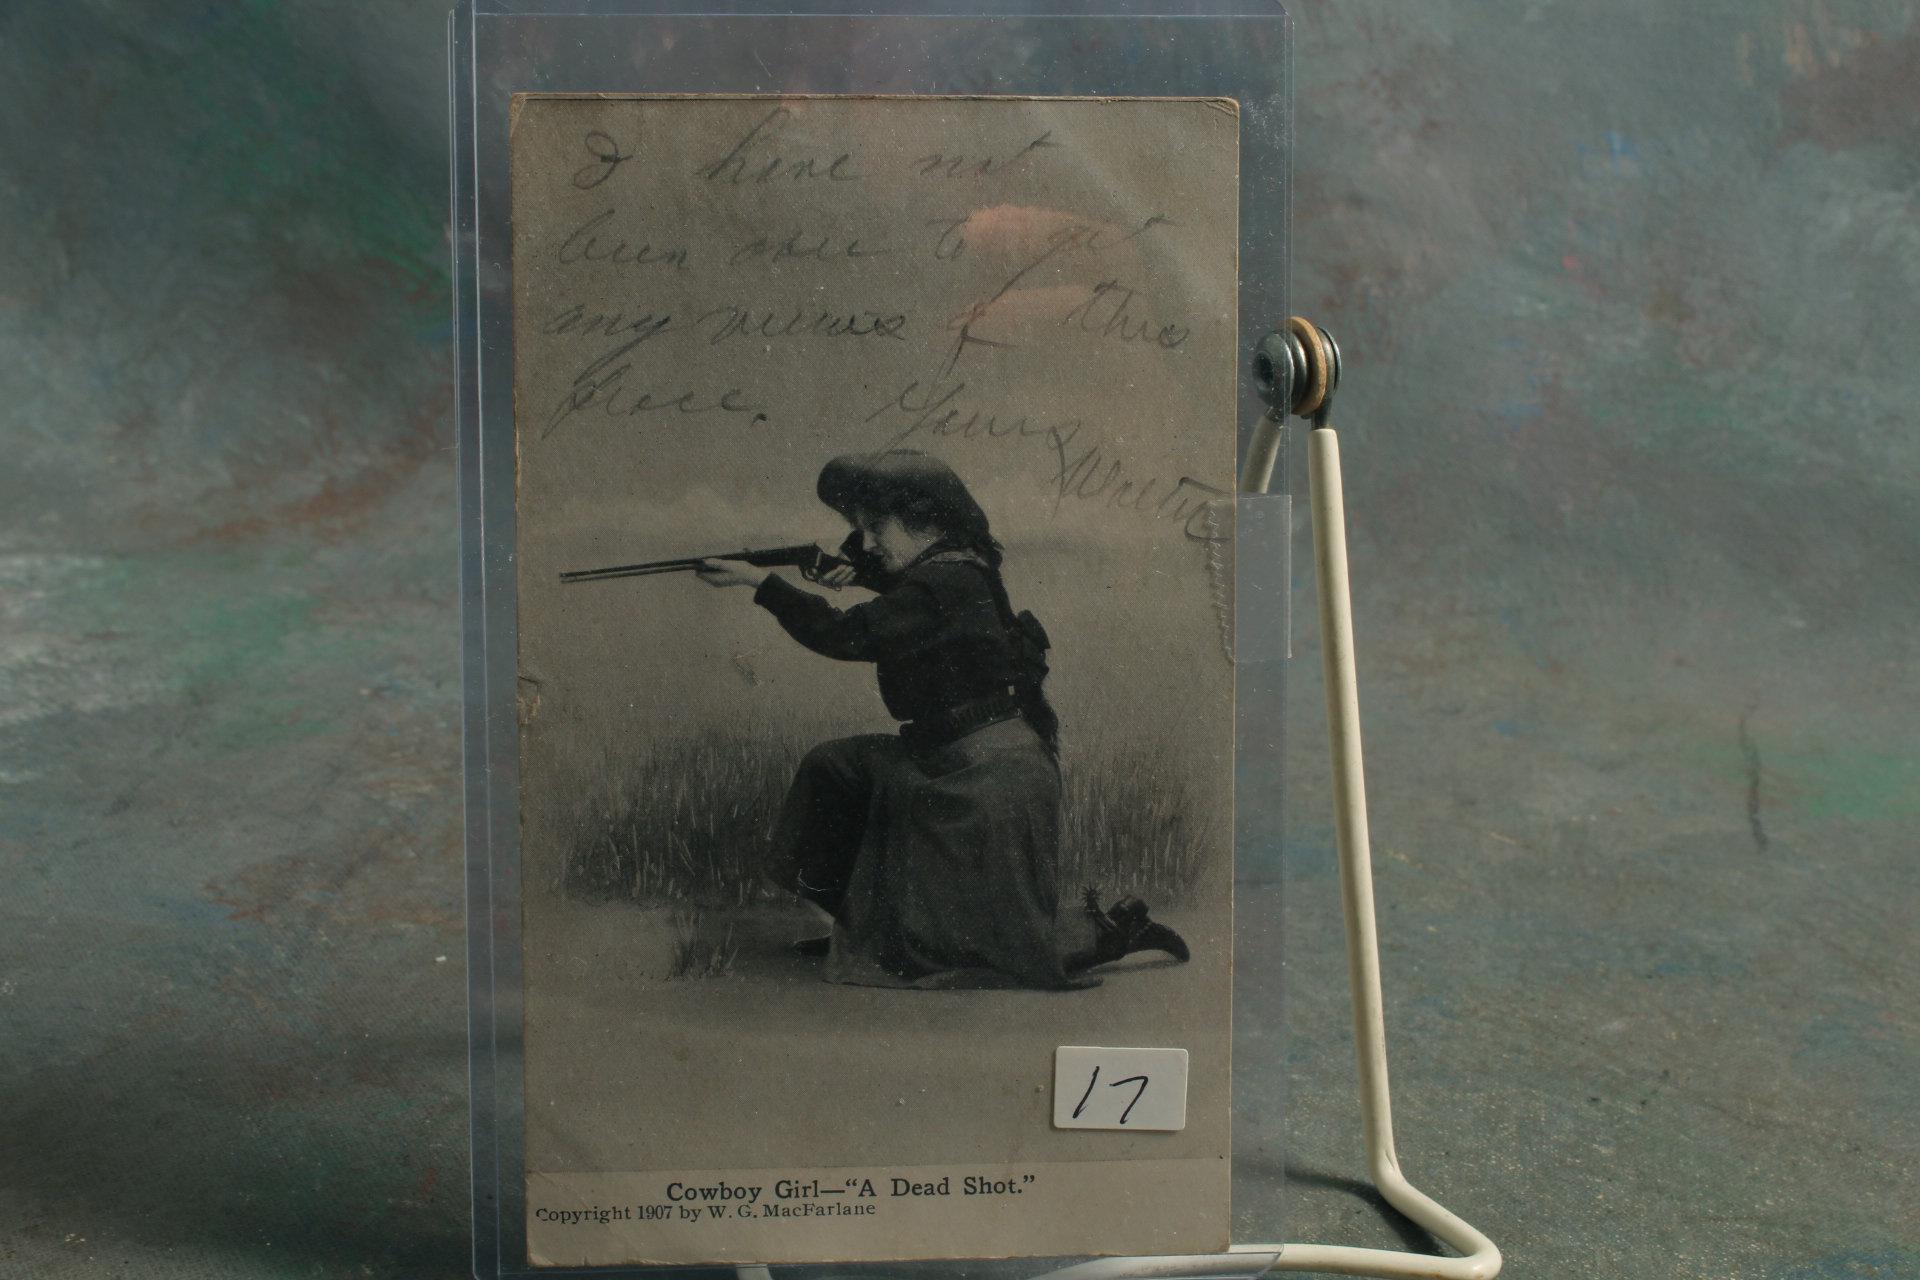 1907 Cowboy Girl "A Dead Shot" Annie Oakley?? Looks like photos of her then